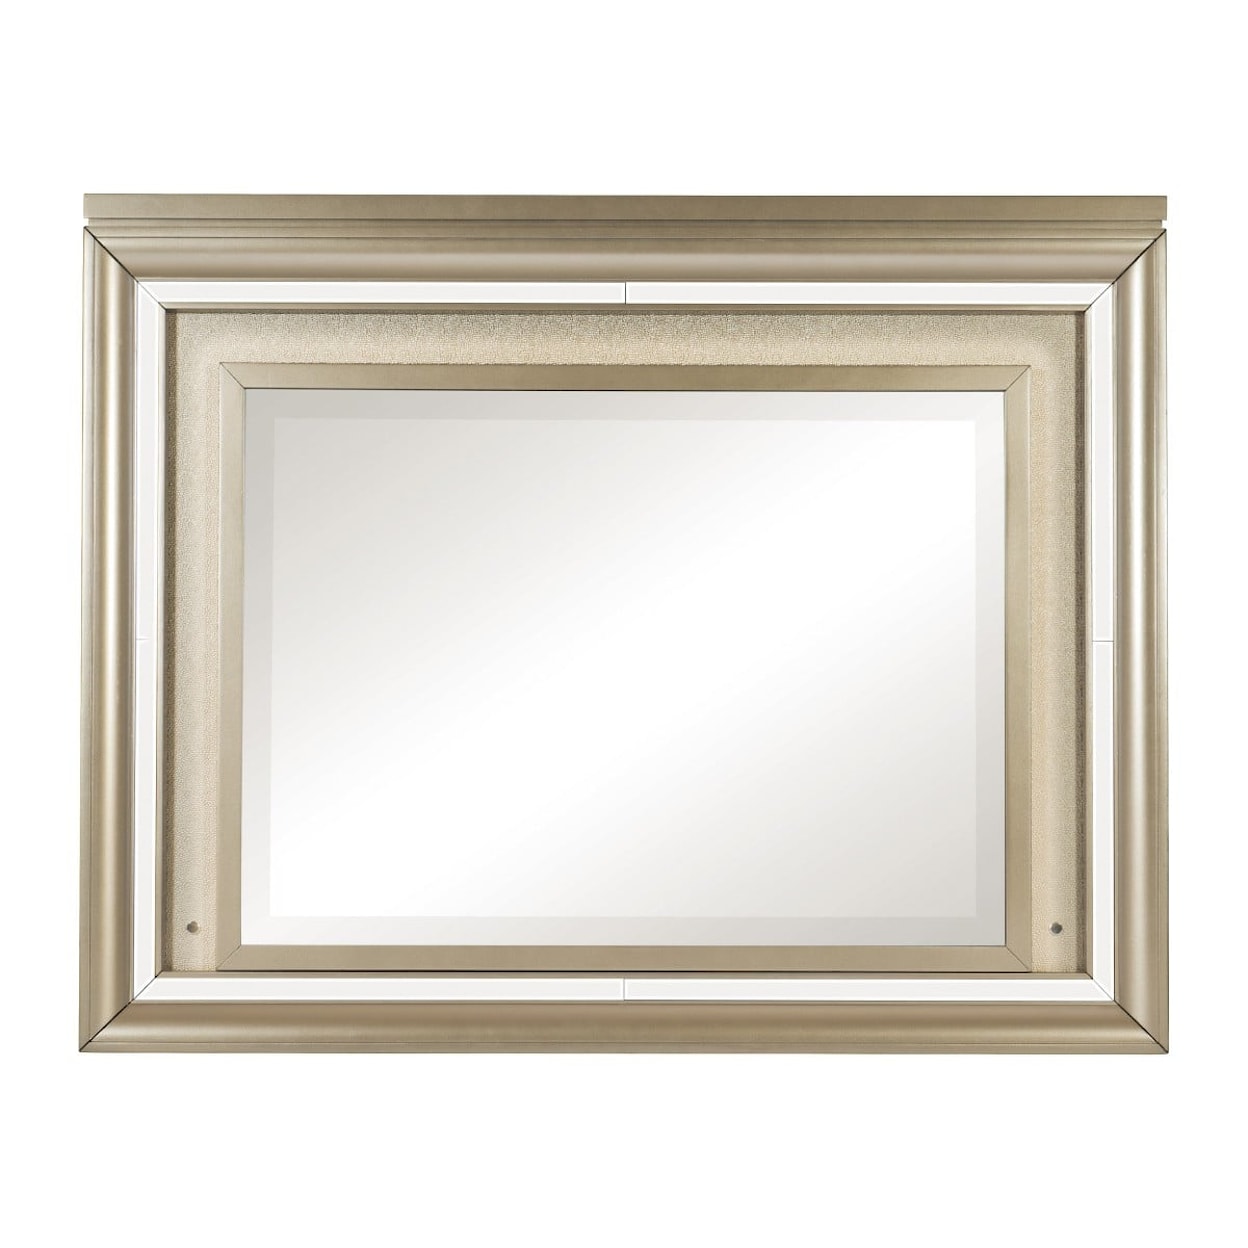 Homelegance Furniture Loudon Mirror with LED Lighting